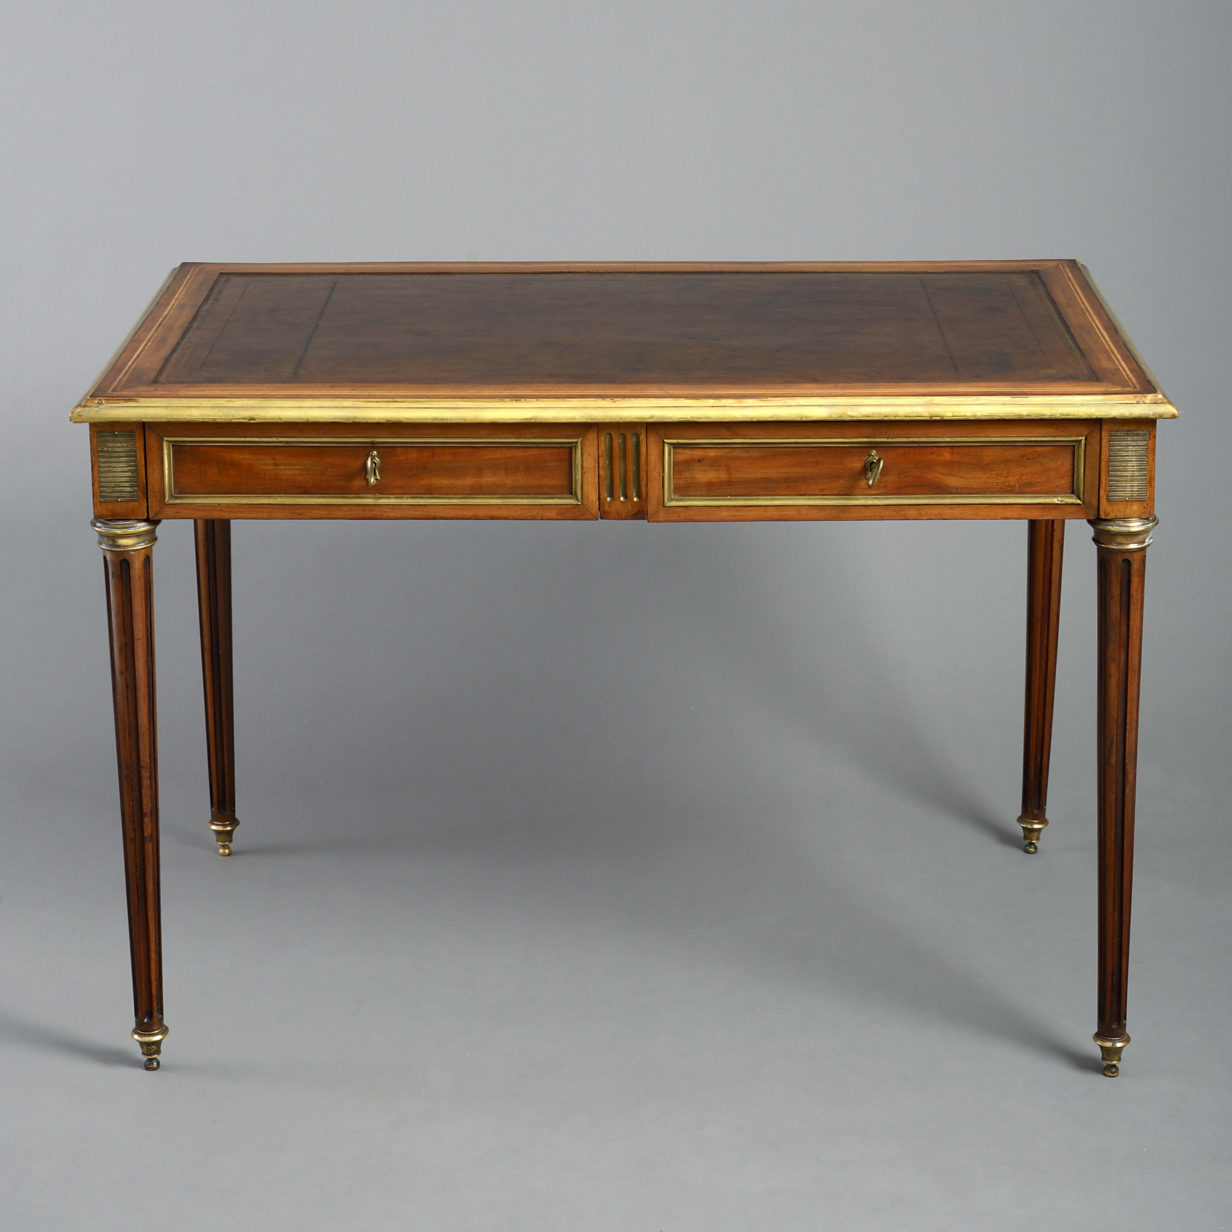 A late 19th century louis xvi style writing table